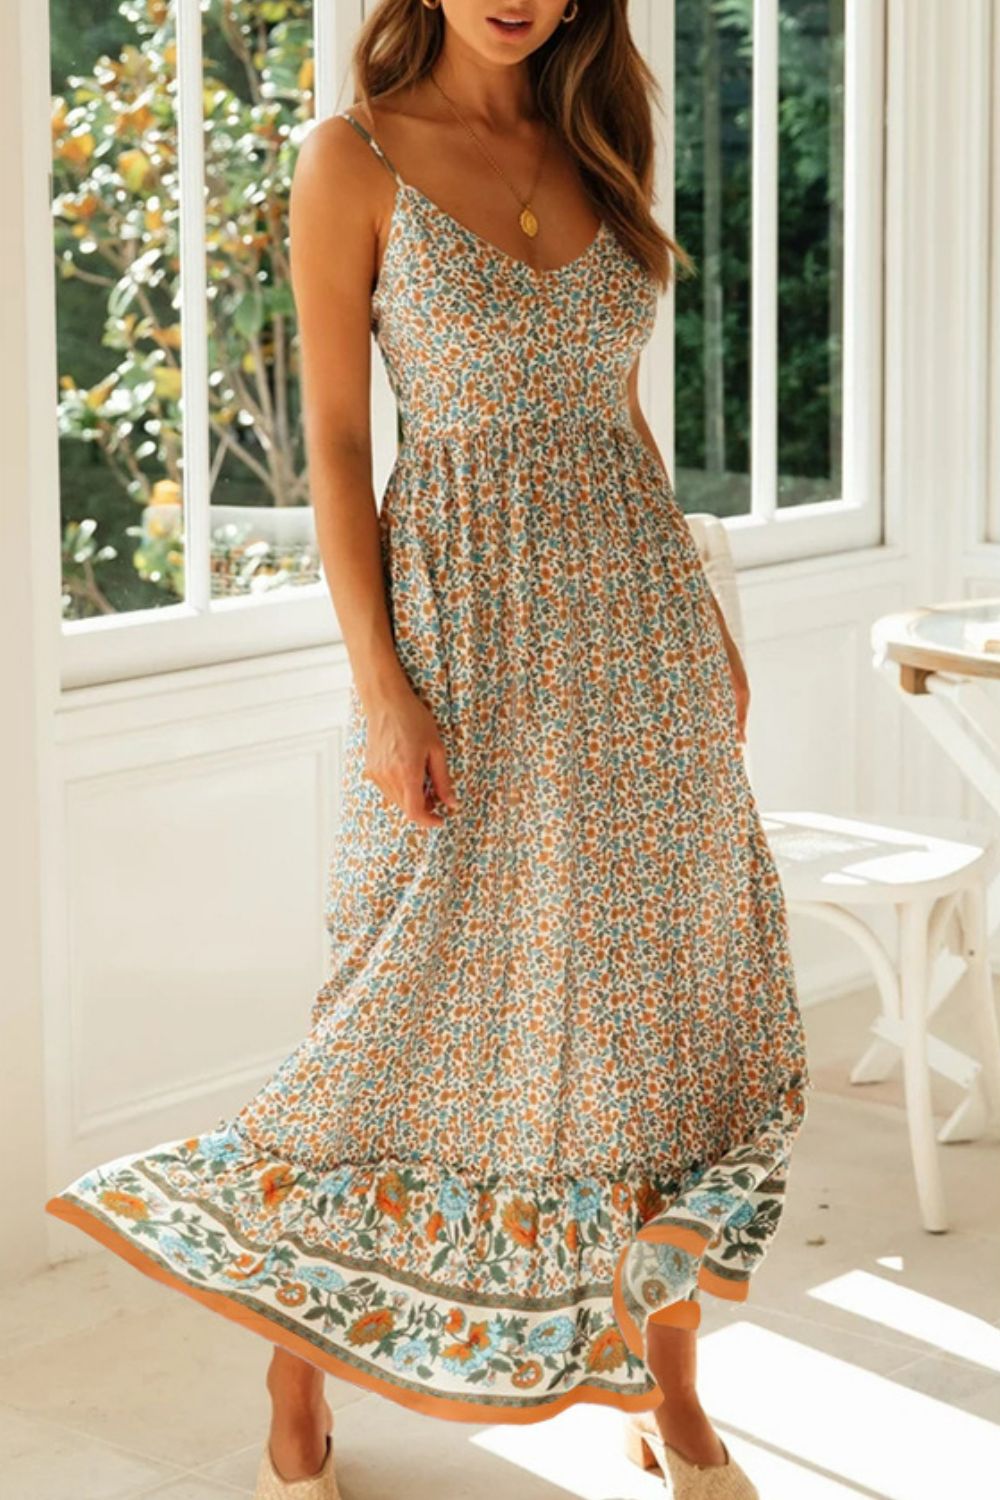 Bohemian Spaghetti Strap Summer Dress - cream maxi dress boho with floral print and a v neck.  #Firefly Lane Boutique1